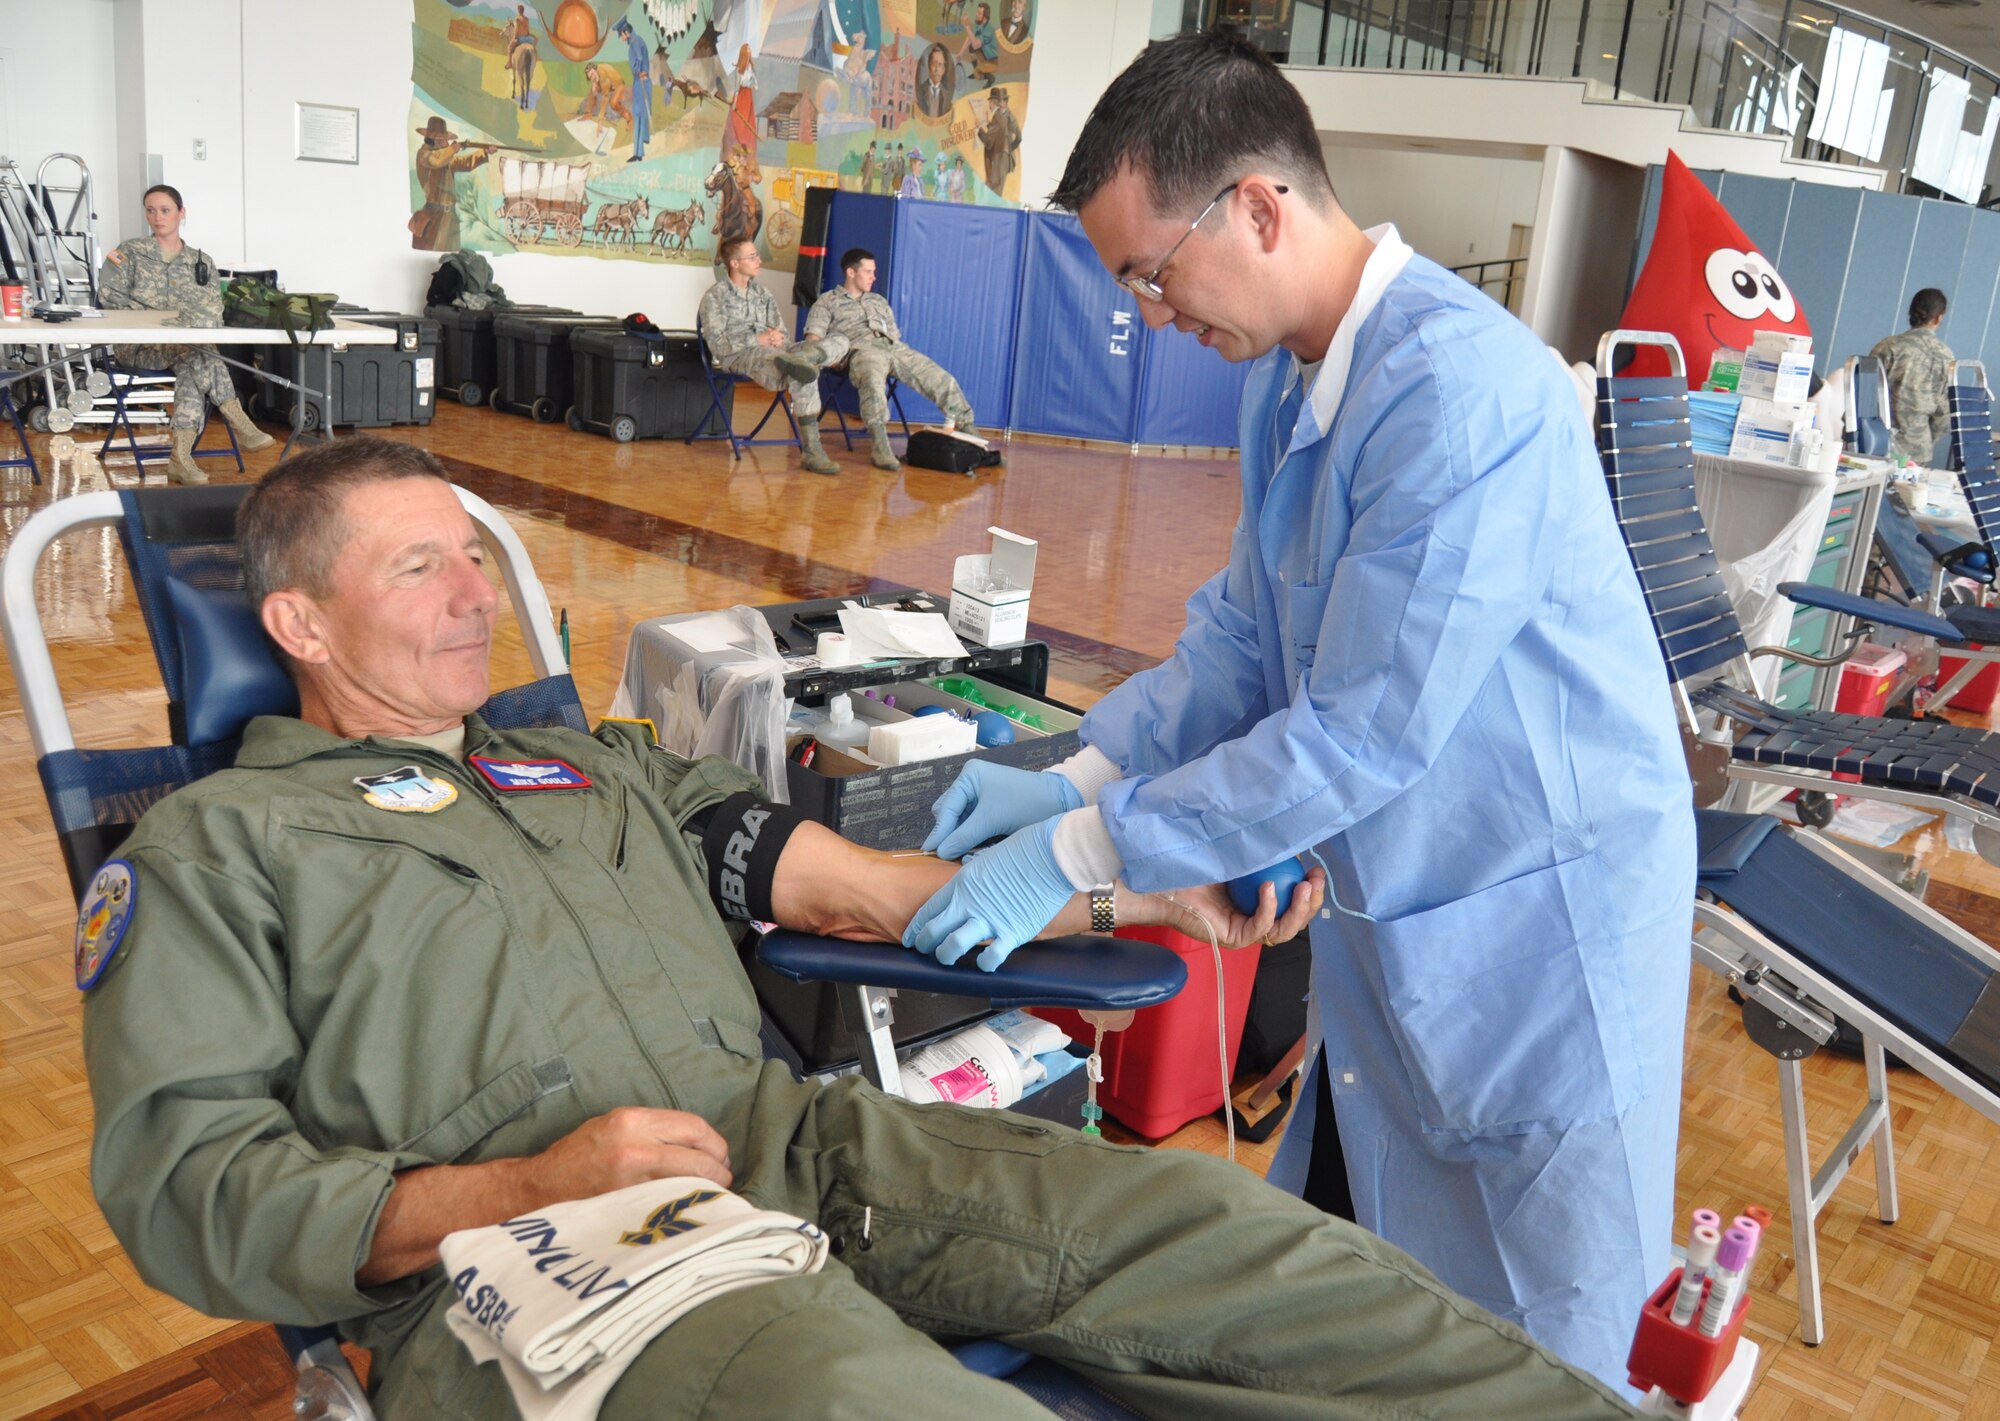 Kevin Nguyen from Keesler Air Force Base, Miss., begins drawing blood from Air Force Academy Superintendent Lt. Gen. Michael Gould.  Gould is a former commander of 2nd Air Force at Keesler.  (Courtesy photo by Lori Kuczmanski)